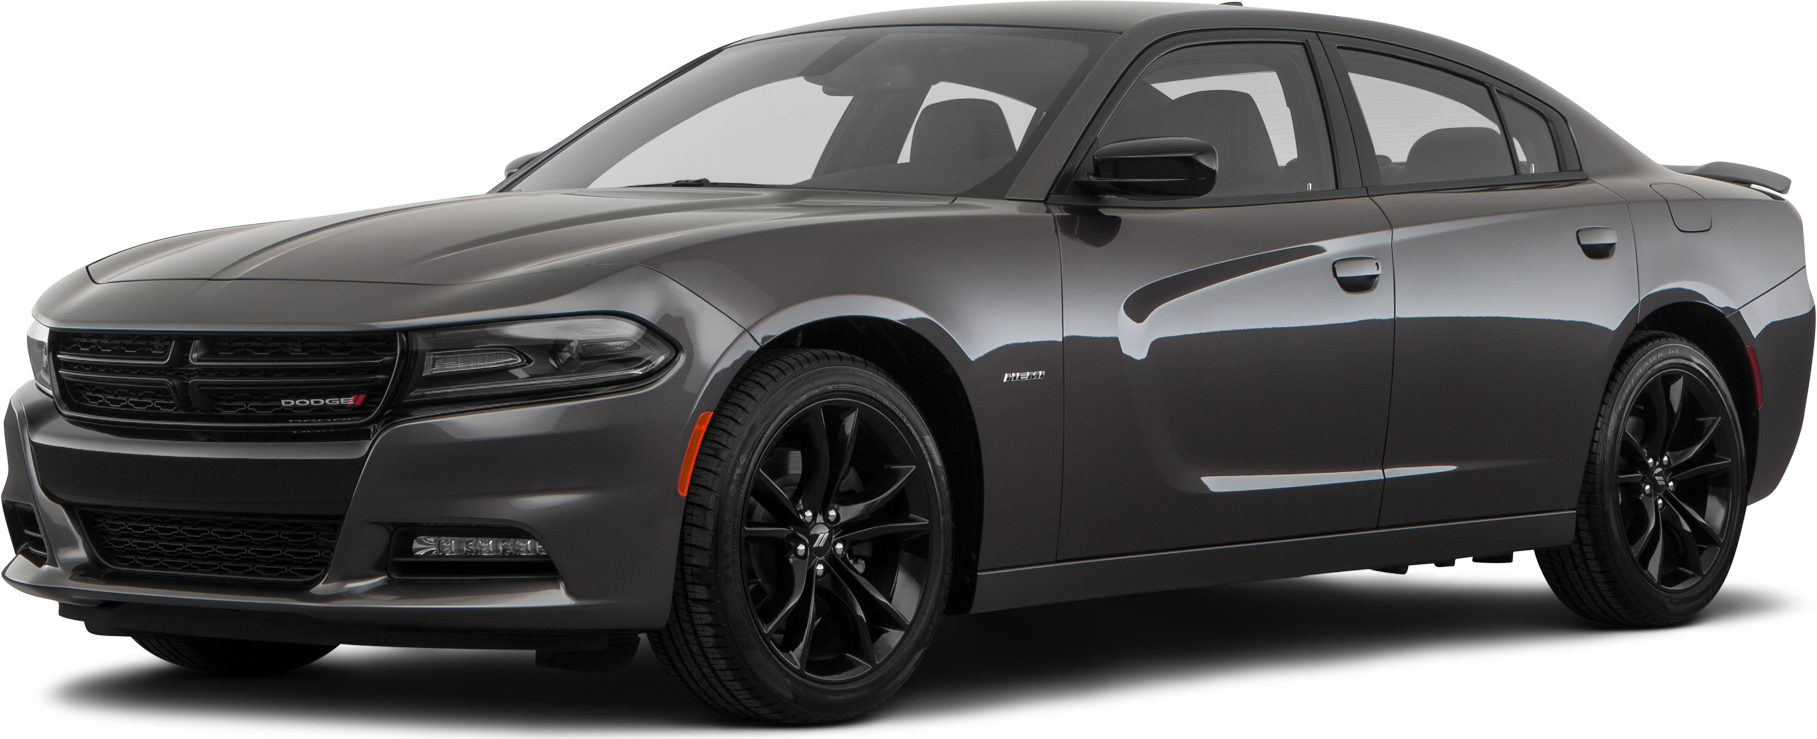 2019 Dodge Charger Price, Value, Ratings & Reviews